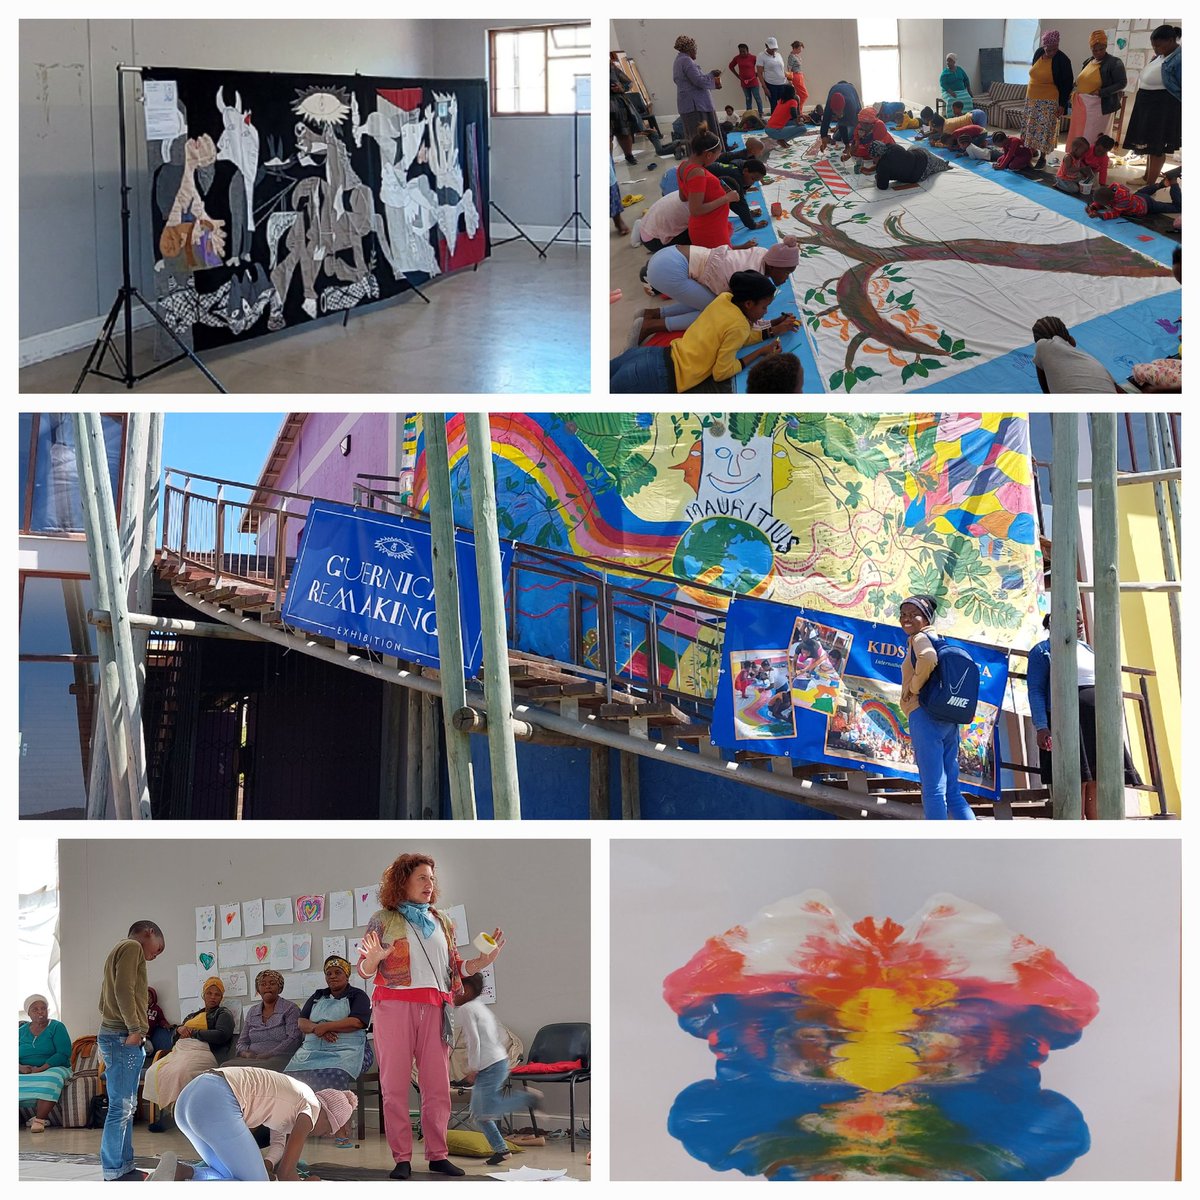 Day 2 and the #guernicaremakings exhibition is up! Today we learnt about colour mixing and the canvas is starting to take shape! @DrNicolaAshmore @KeiskammaTrust @savinatarsitano #artactivism #kidsguernica #picasso #universityofbrighton #protestbanner